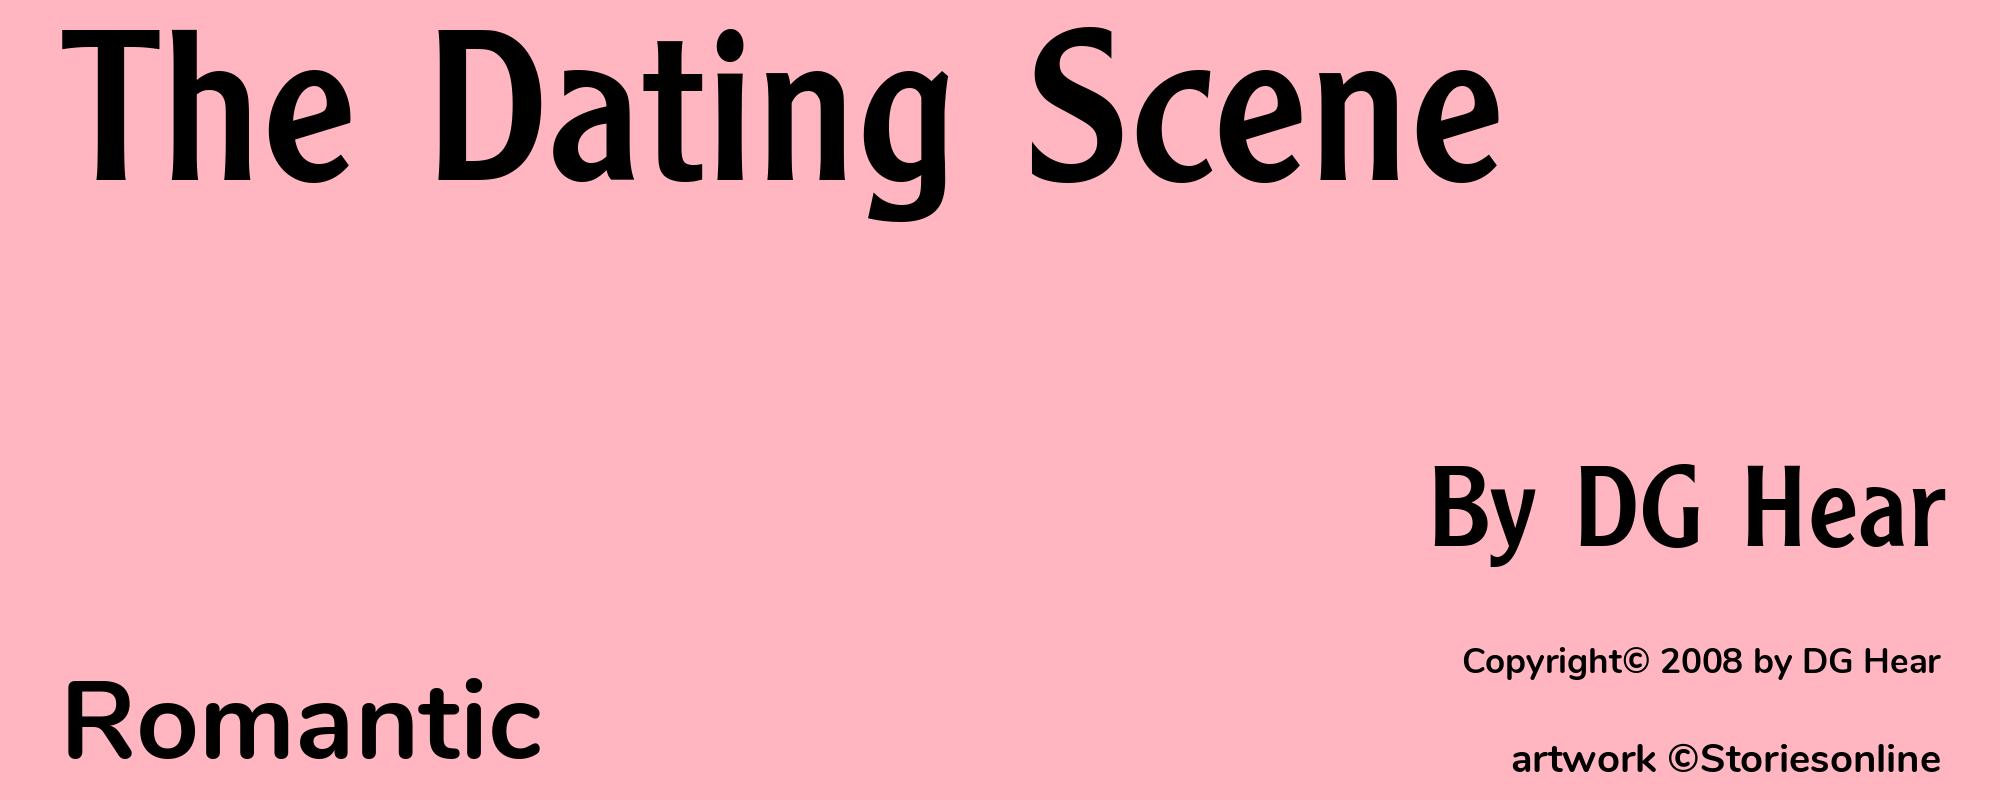 The Dating Scene - Cover